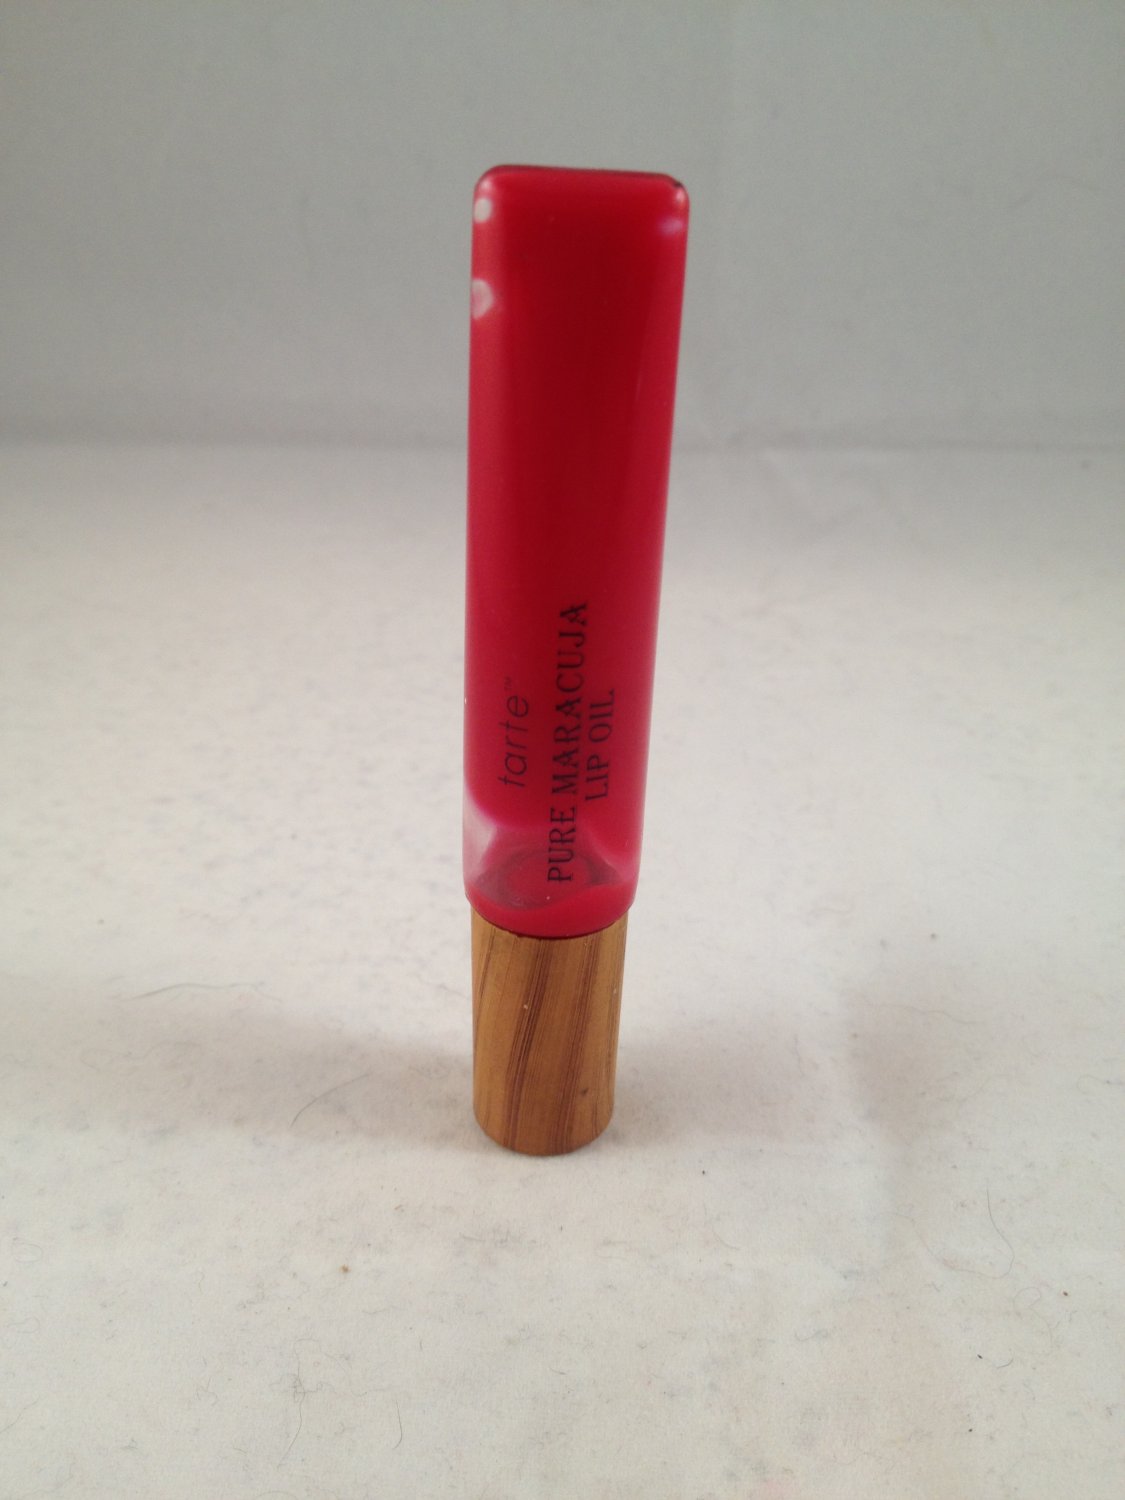 Tarte Hydrating Pure Maracuja Lip Oil Shimmering Red Gloss lipgloss